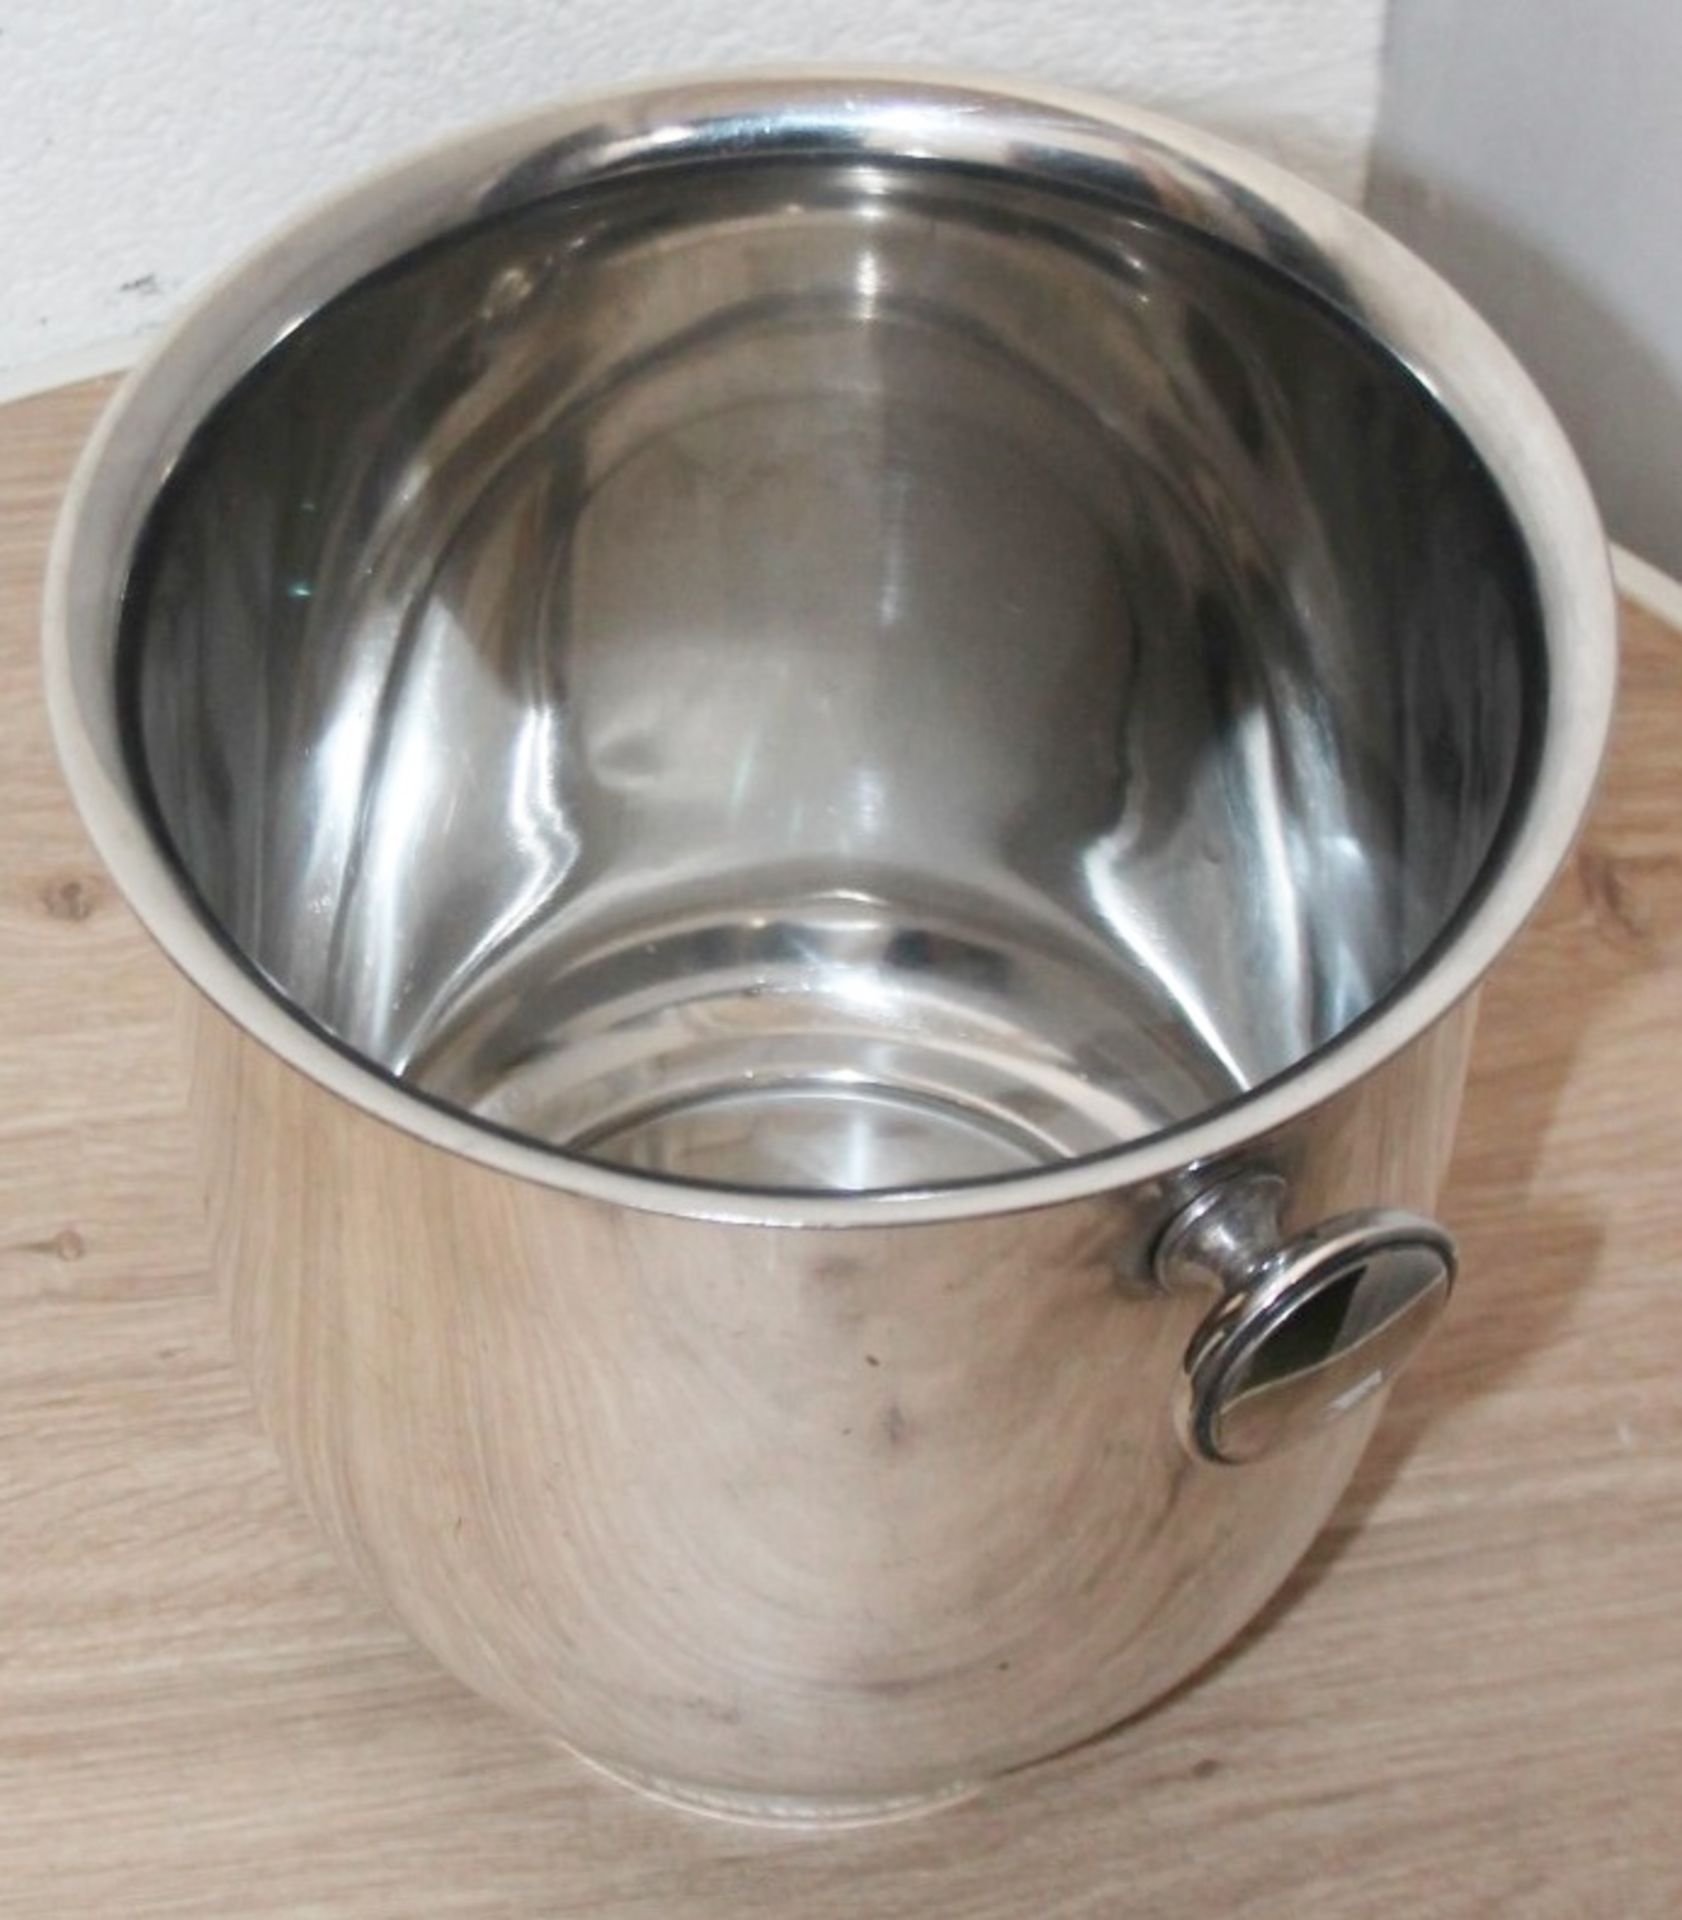 1 x SAMBONET Elite Ice Bucket with Handles - Stainless Steel - Current RRP £148.00 - Recently - Image 2 of 4